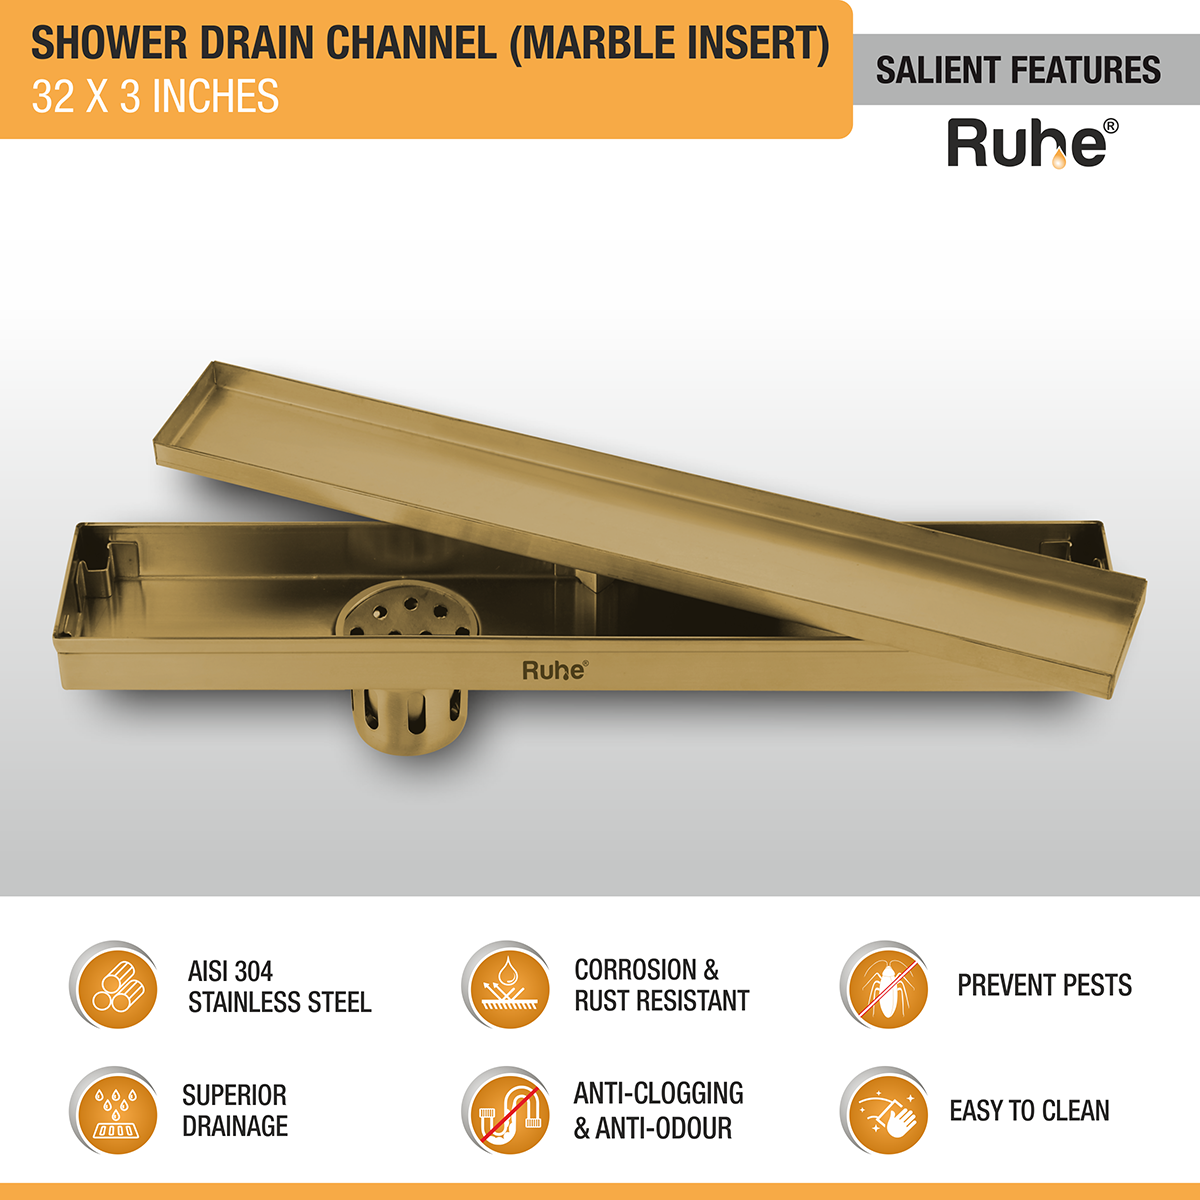 Marble Insert Shower Drain Channel (32 x 3 Inches) YELLOW GOLD PVD Coated features and benefits